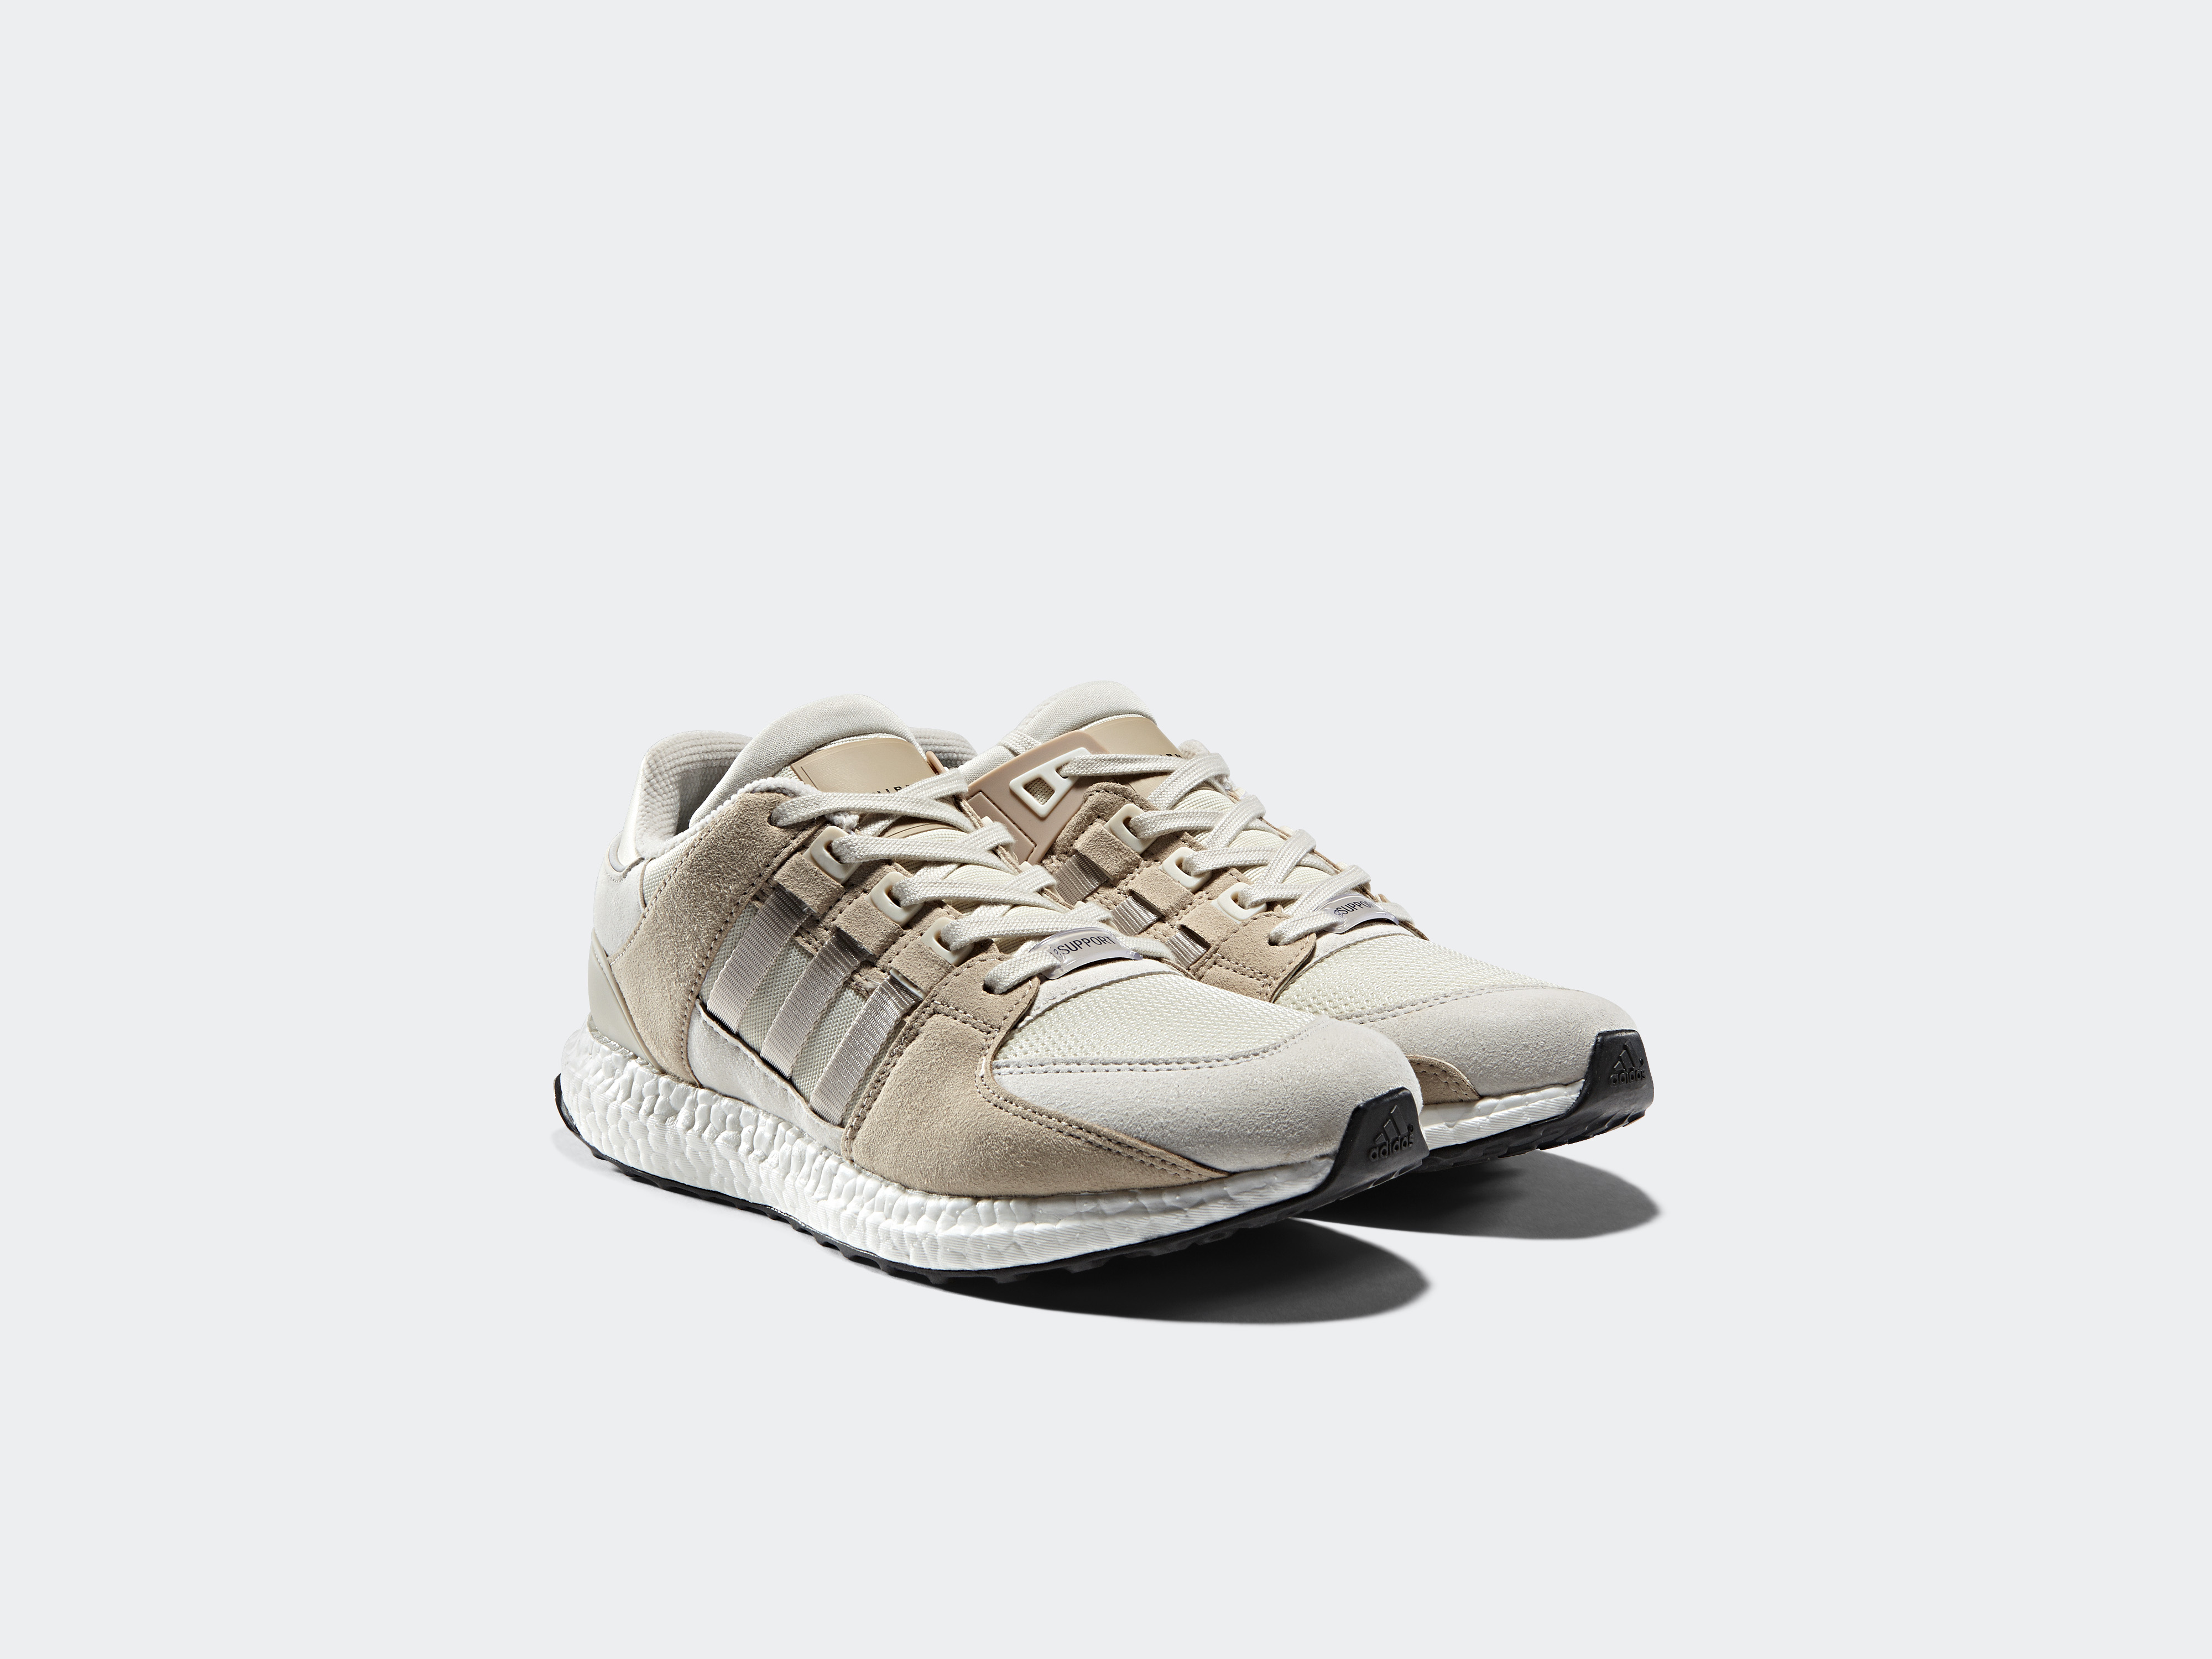 adidas EQT support ultra Muted Premium Pack 4